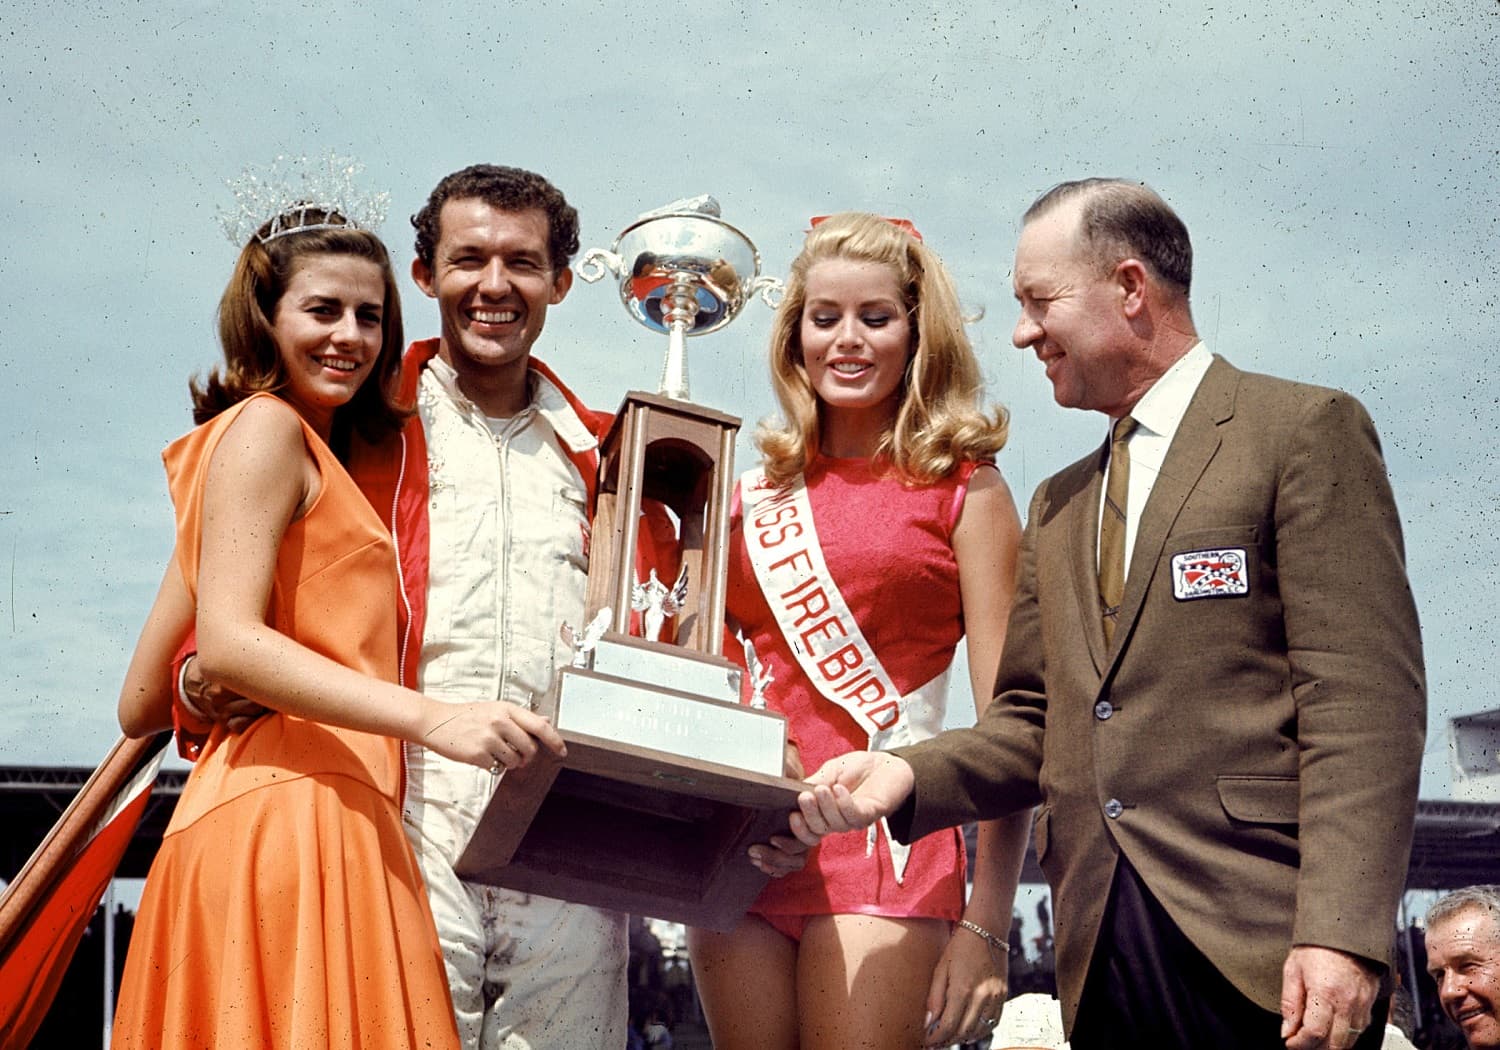 Richard Petty in Victory Lane after winning the 1967 Southern 500 NASCAR Cup race at Darlington Raceway.